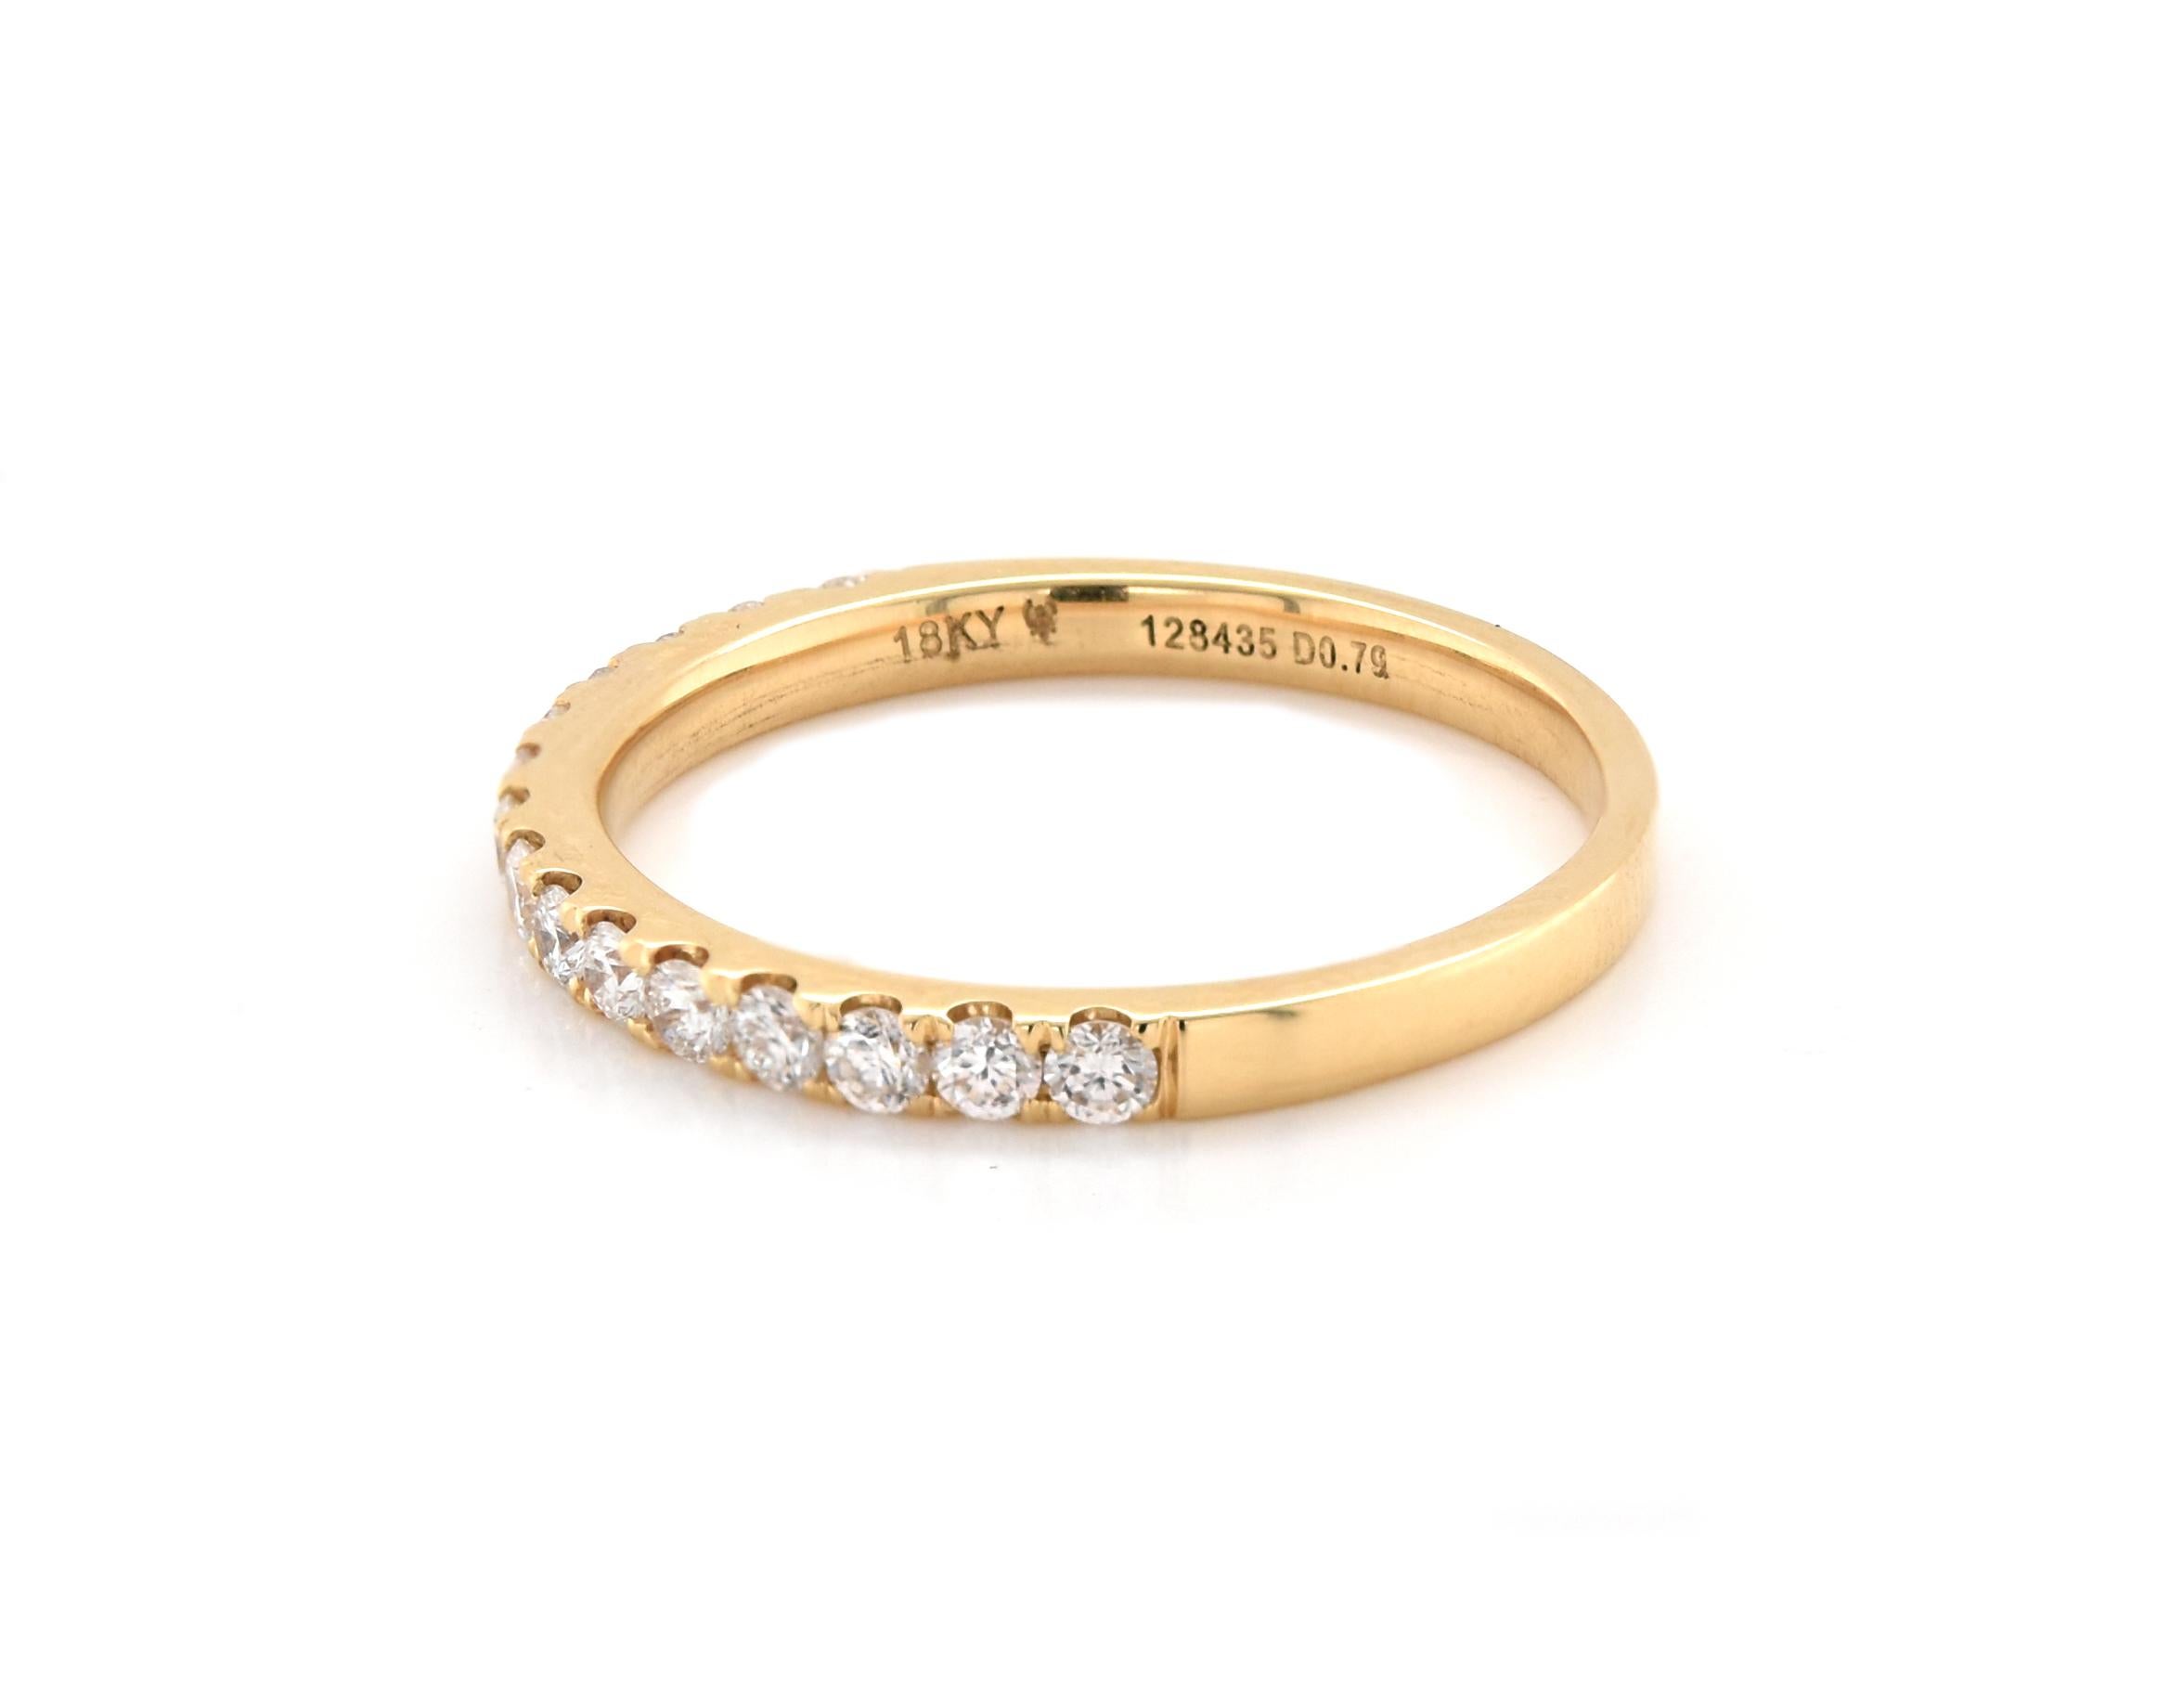 Designer: custom
Material: 18k yellow gold
Diamonds: 15 round cut = .45cttw
Color: G
Clarity: VS1
Size: 7 (please allow two additional shipping days for sizing requests)  
Dimensions: ring measures 2.04mm in width
Weight: 2.10 grams
